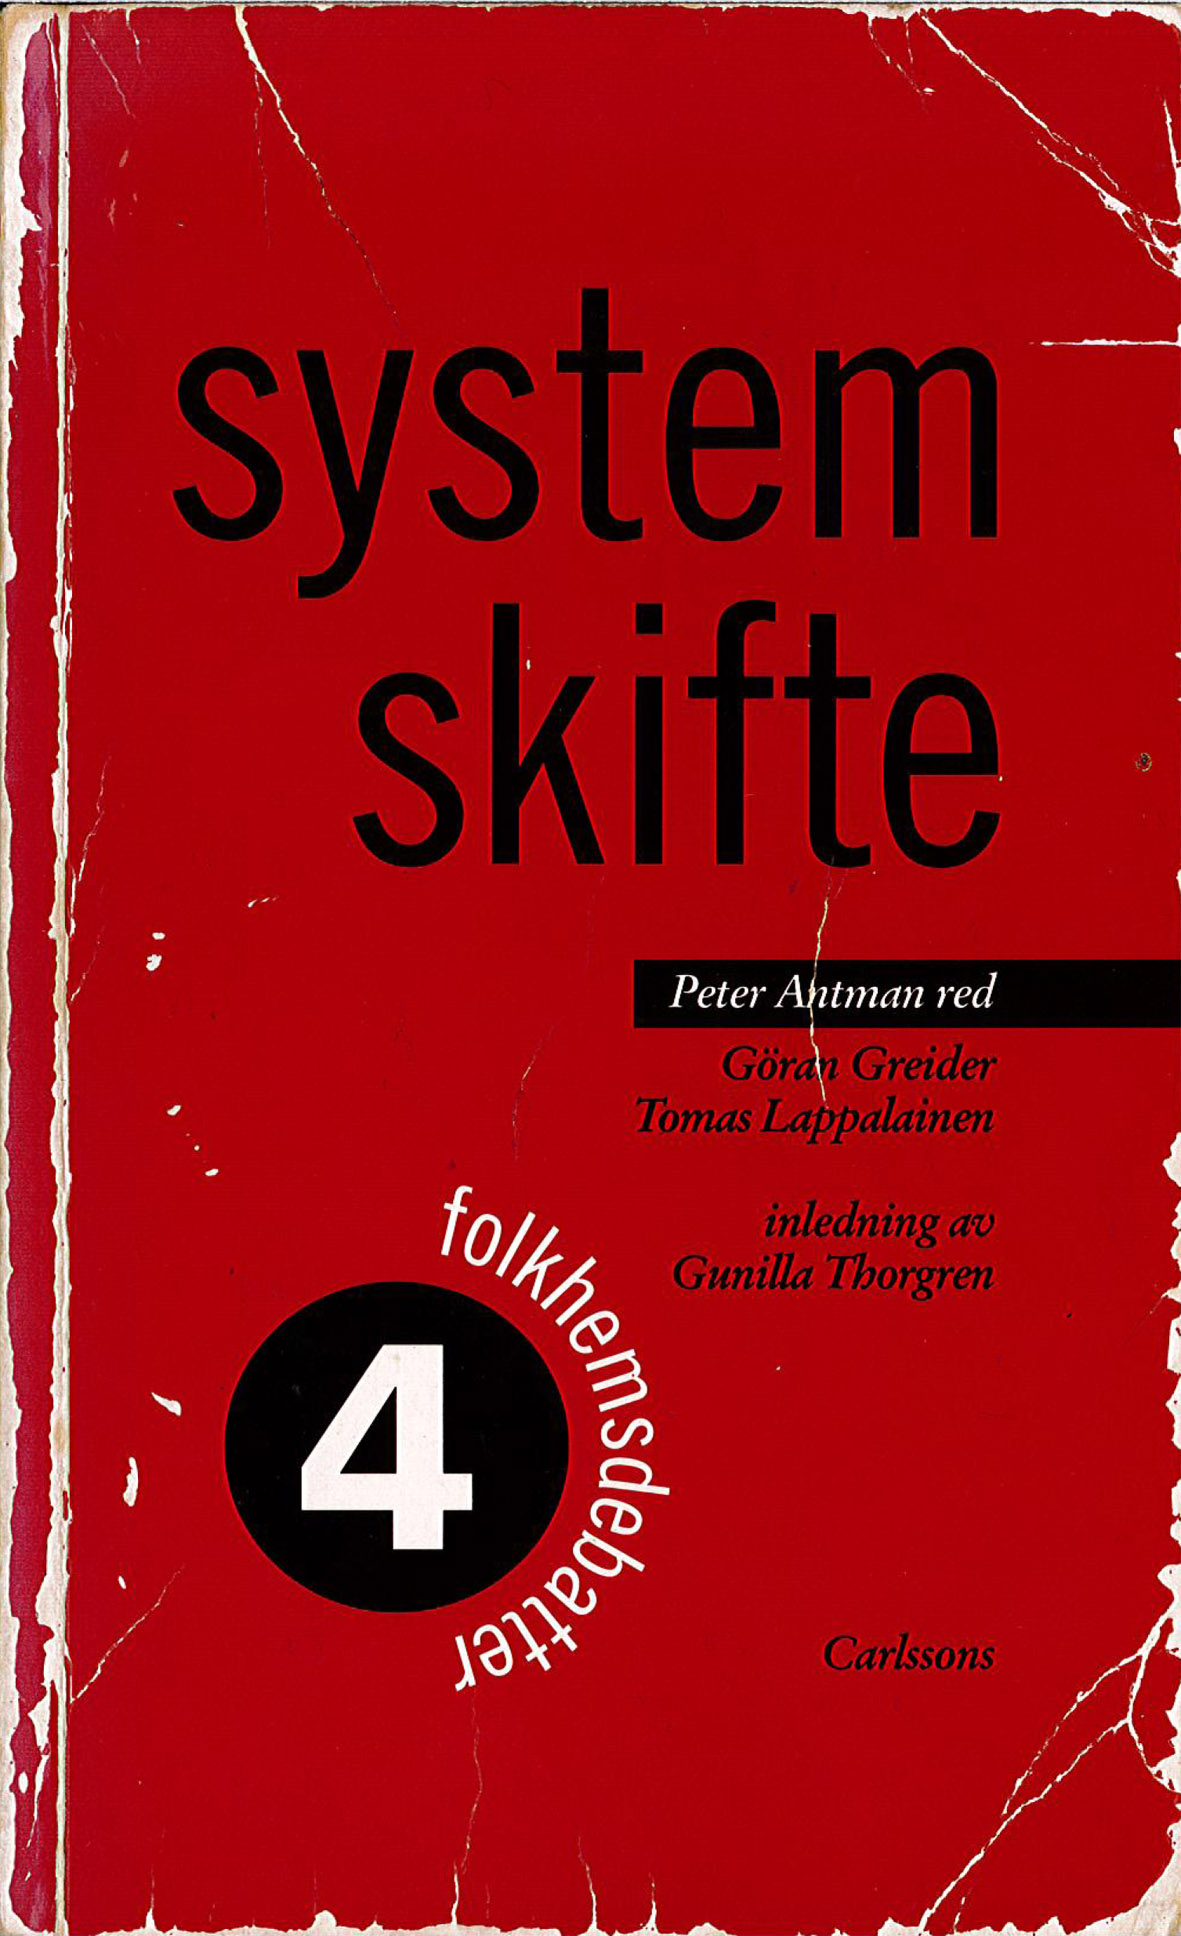 Systemskifte